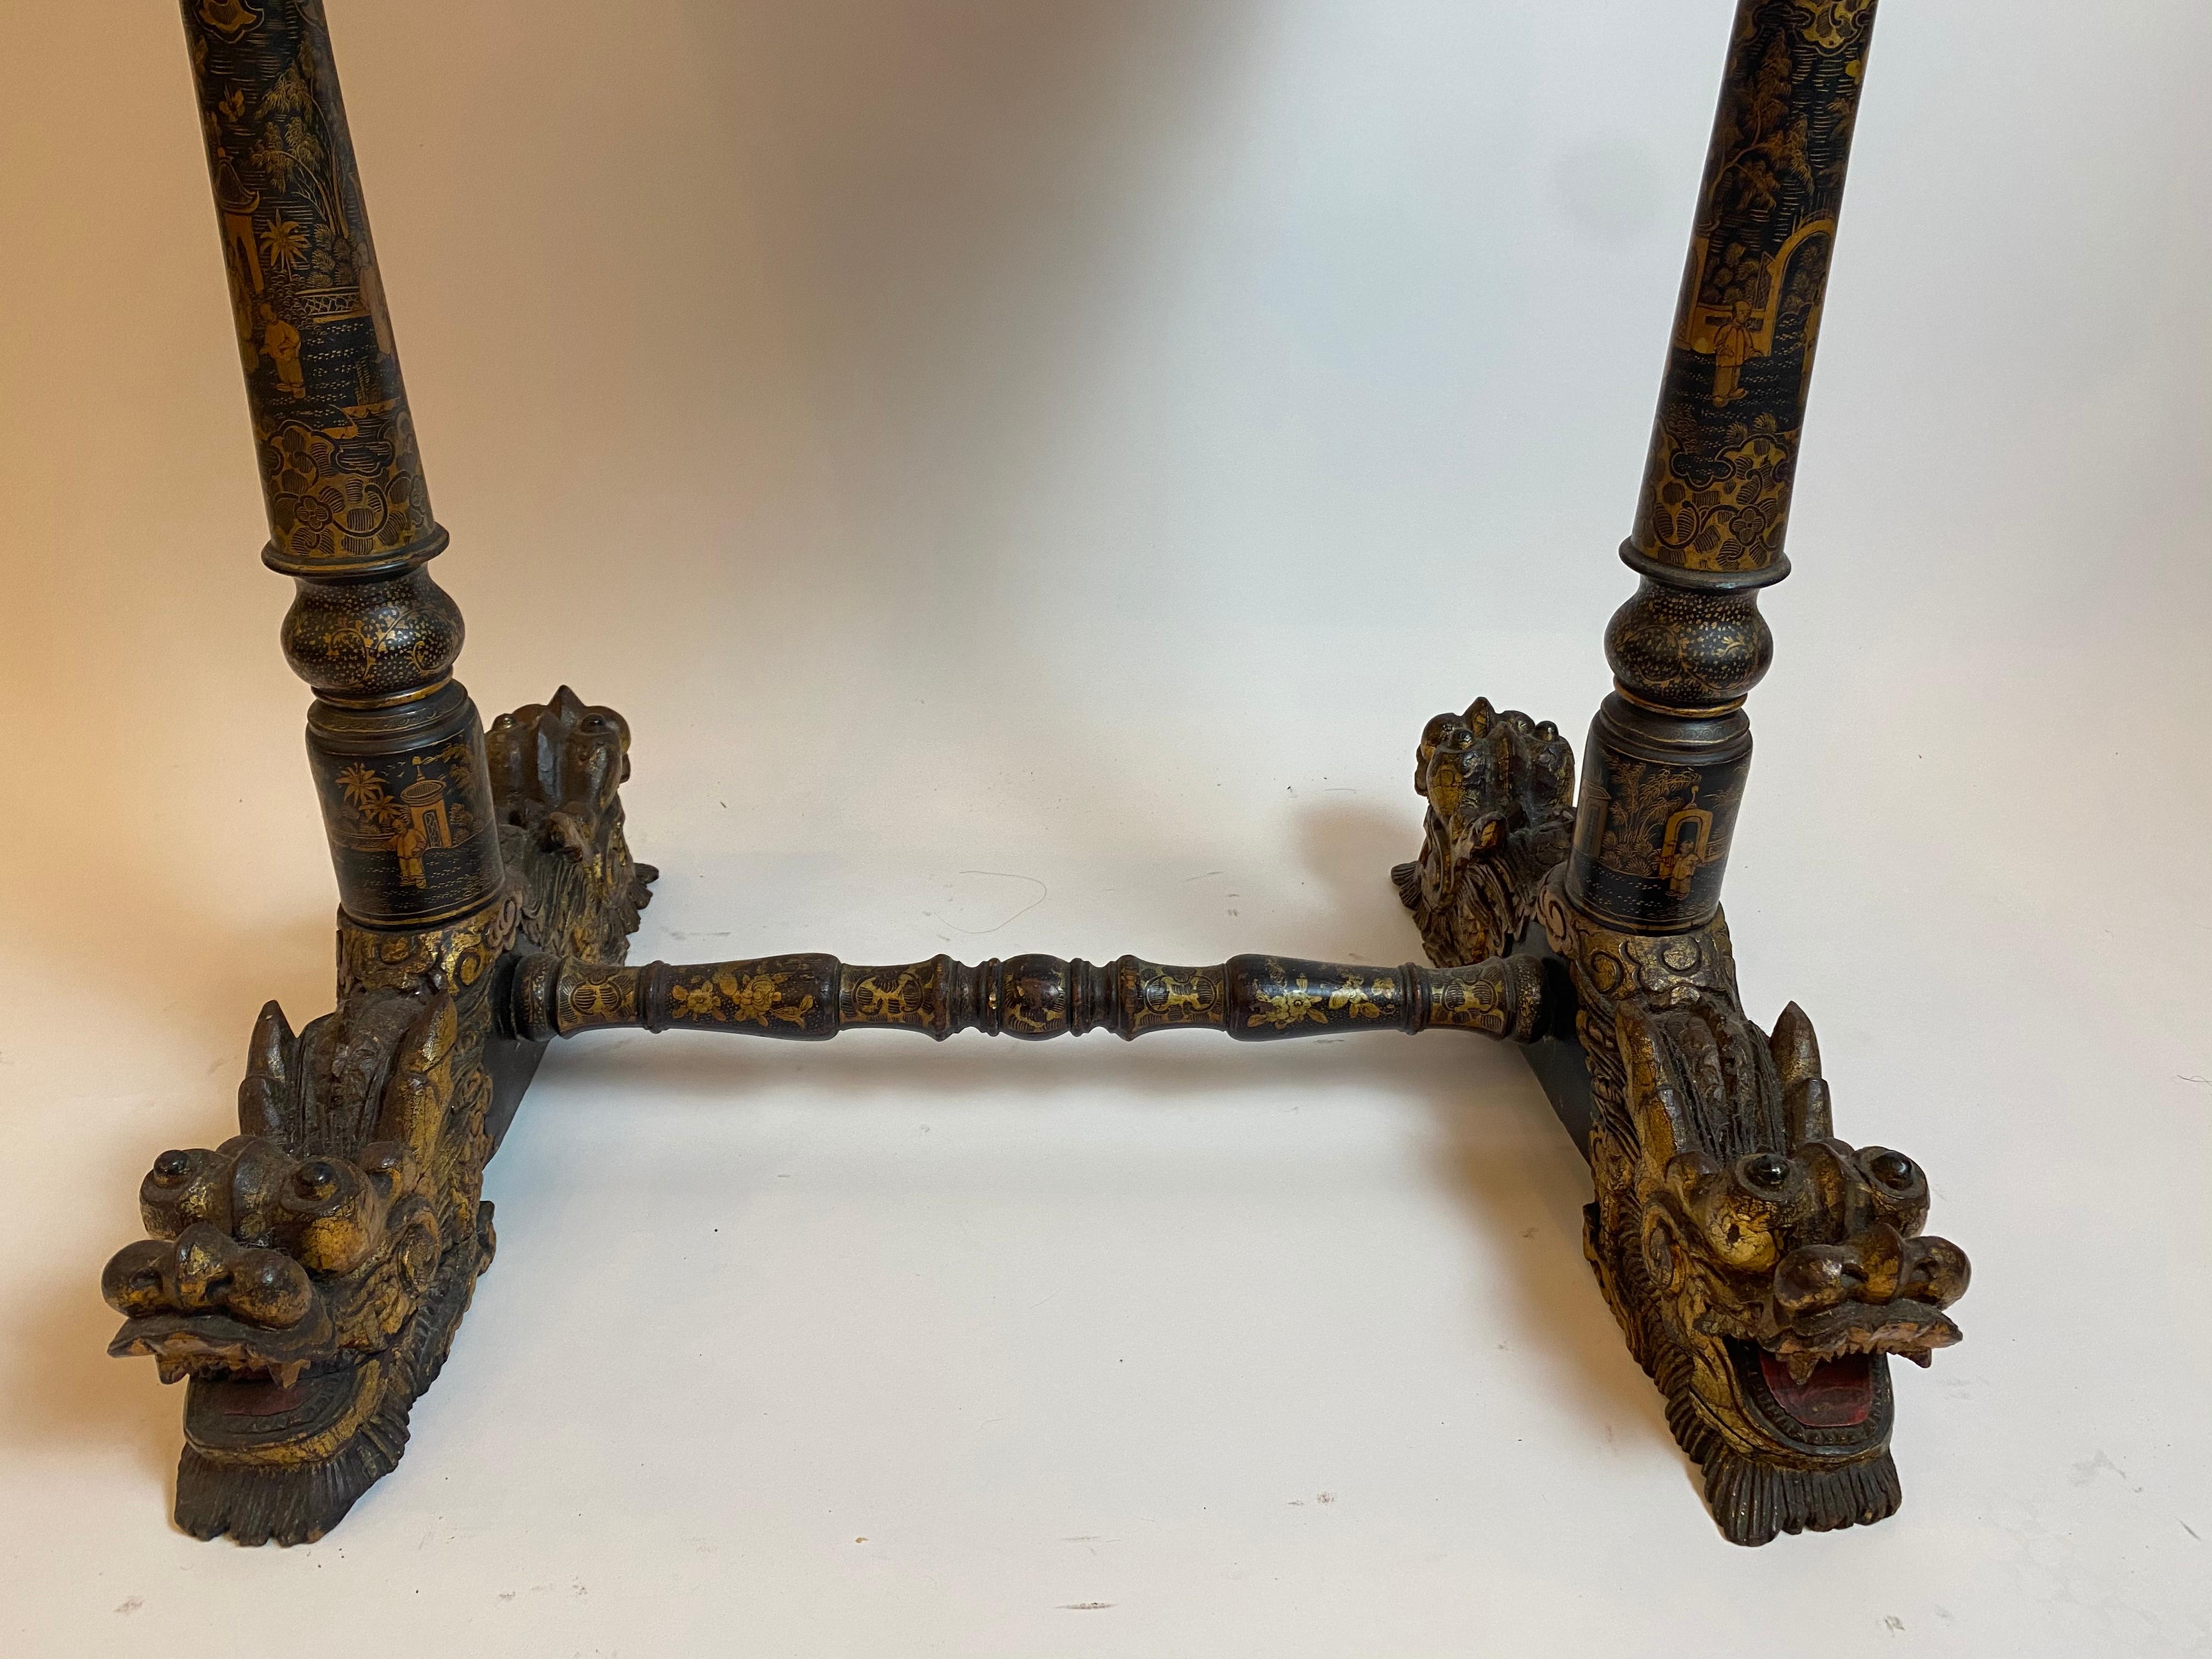 Early 19th Century Chinese Export Lacquer and Gilt Work Table For Sale 11